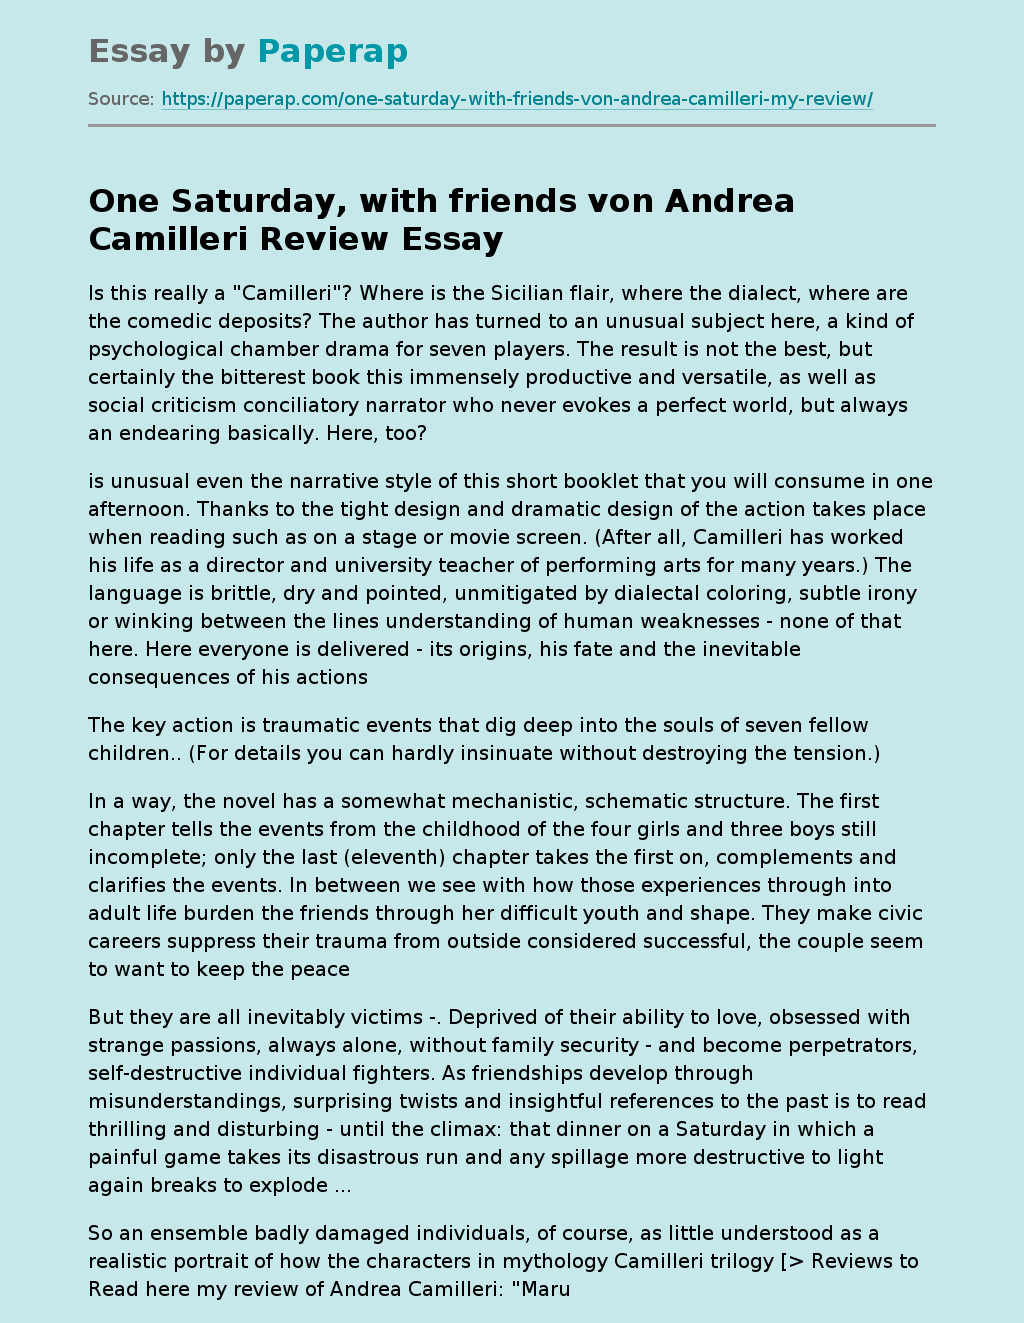 One Saturday, with friends von Andrea Camilleri  Review